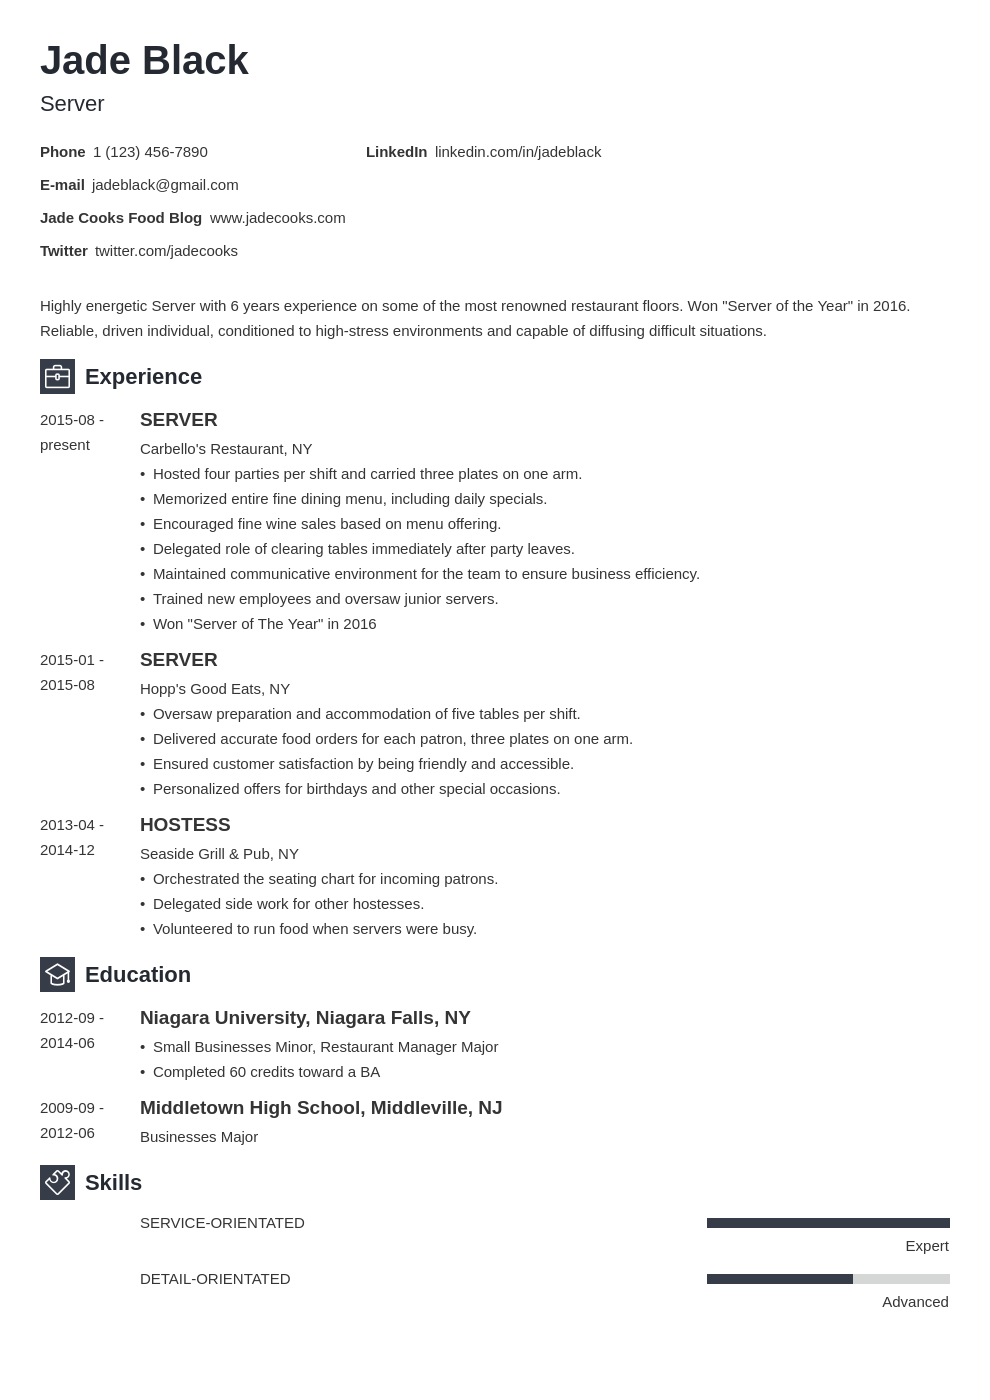 Server Job Description for a Resume: Examples and How-To